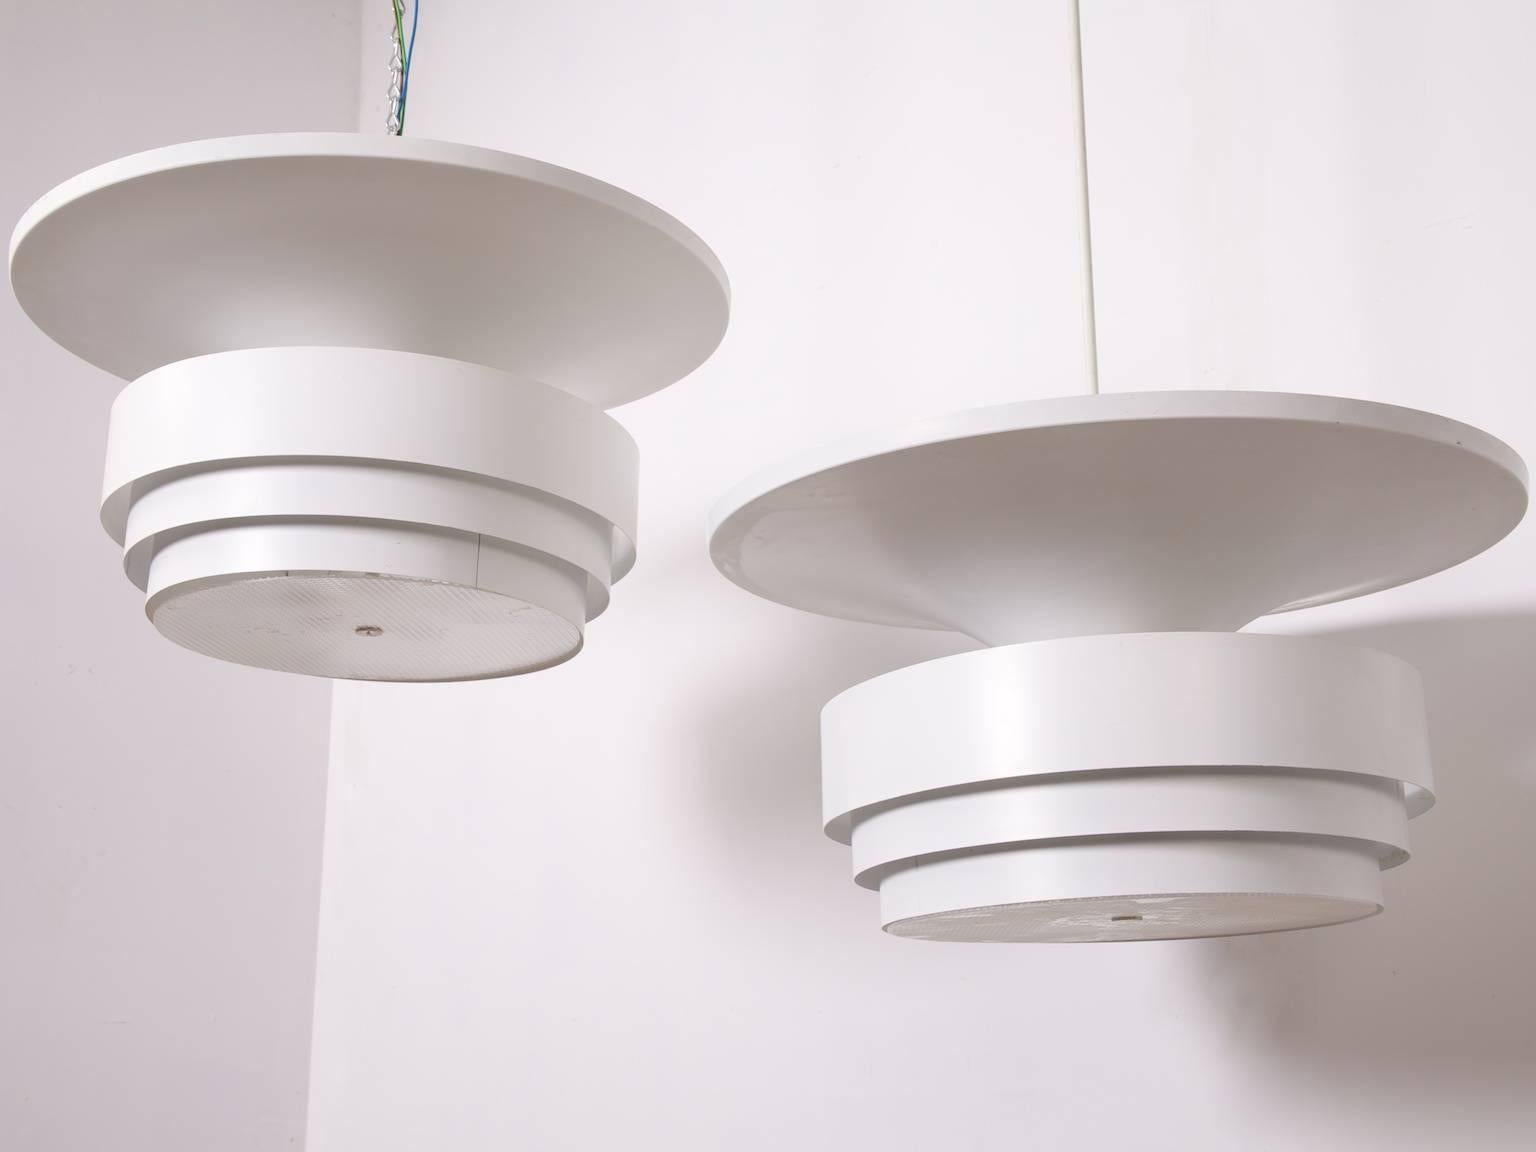 A run of six multi layered pendant lights designed by Hans Agne Jakobssen,

Danish, 1960s.

Rewired and pat tested.

.